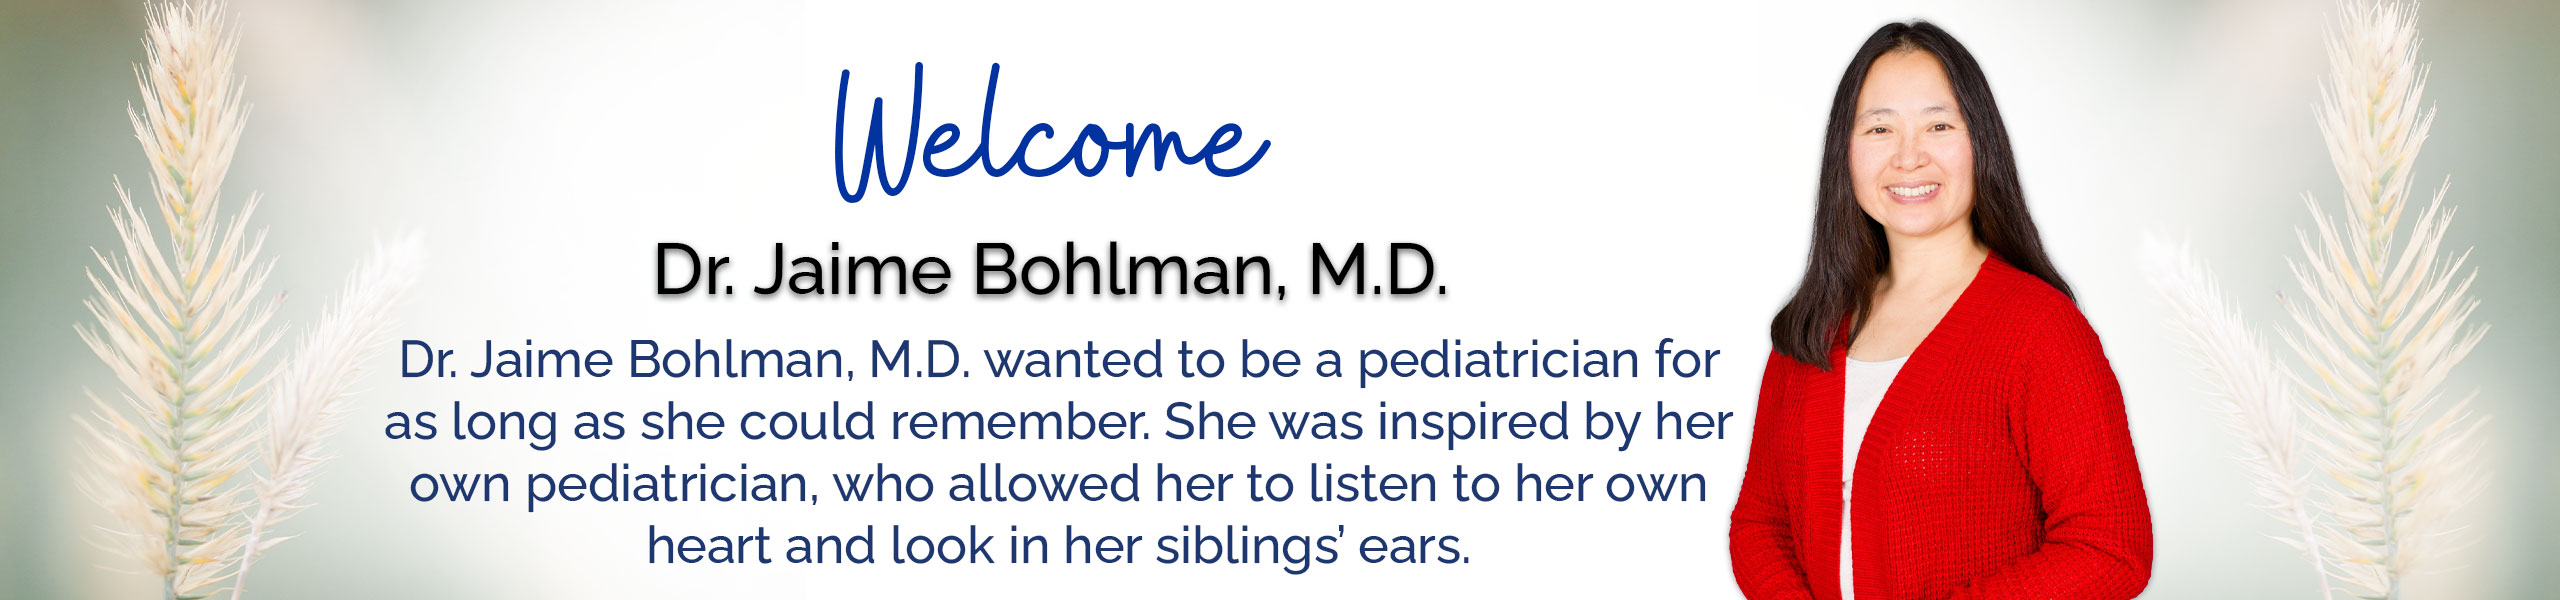 Welcome Dr. Jaime Bohlman, M.D.
Dr. Jaime Bonlman, M.D. wanted to be a pediatrician for as long as she could remember. She was inspired by her own pediatrician, who allowed her to listen to her own heart and look in her siblings' ears.